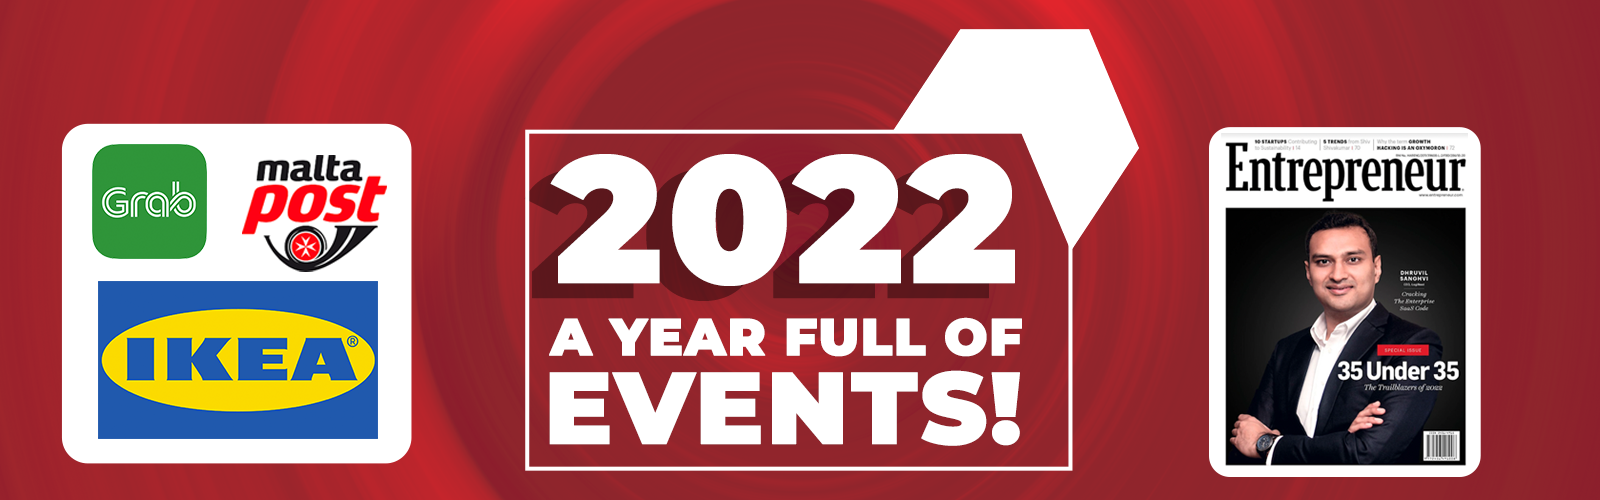 LogiNext 2022: The Year In Review- New Partnerships, Awards, Events, and More!